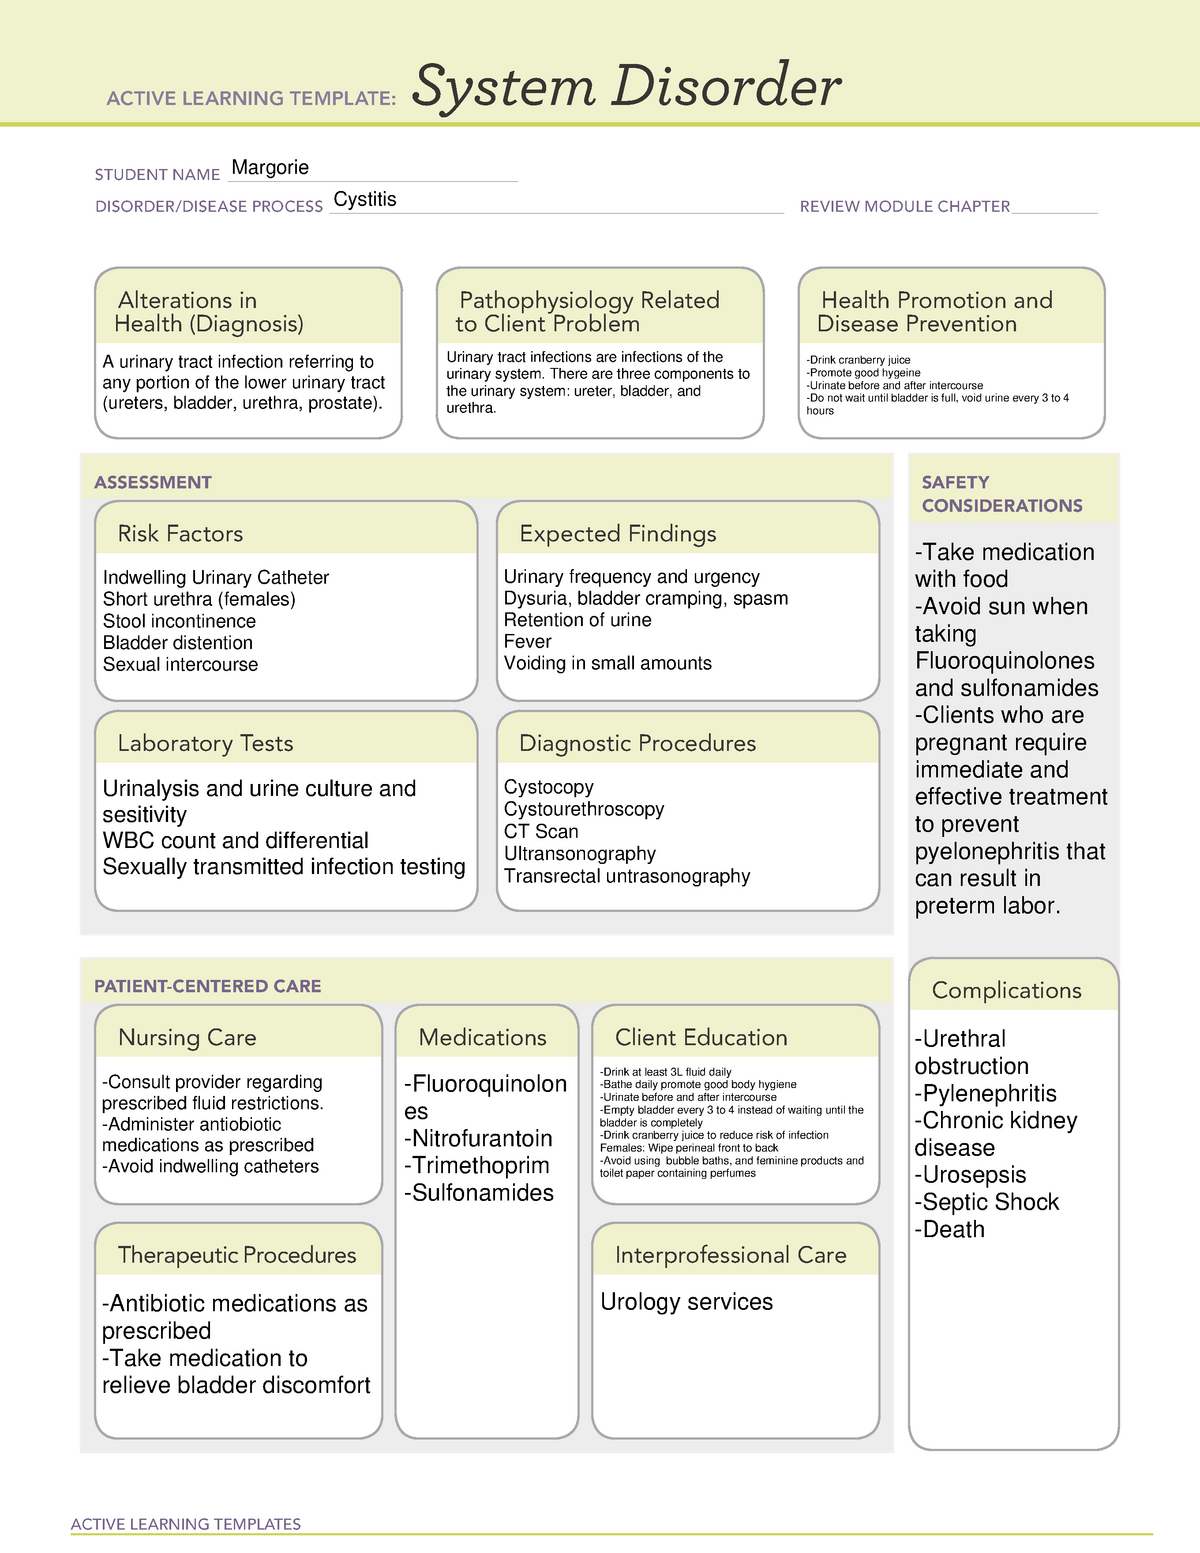 ATI System Disorder Cystitis template ACTIVE LEARNING TEMPLATES